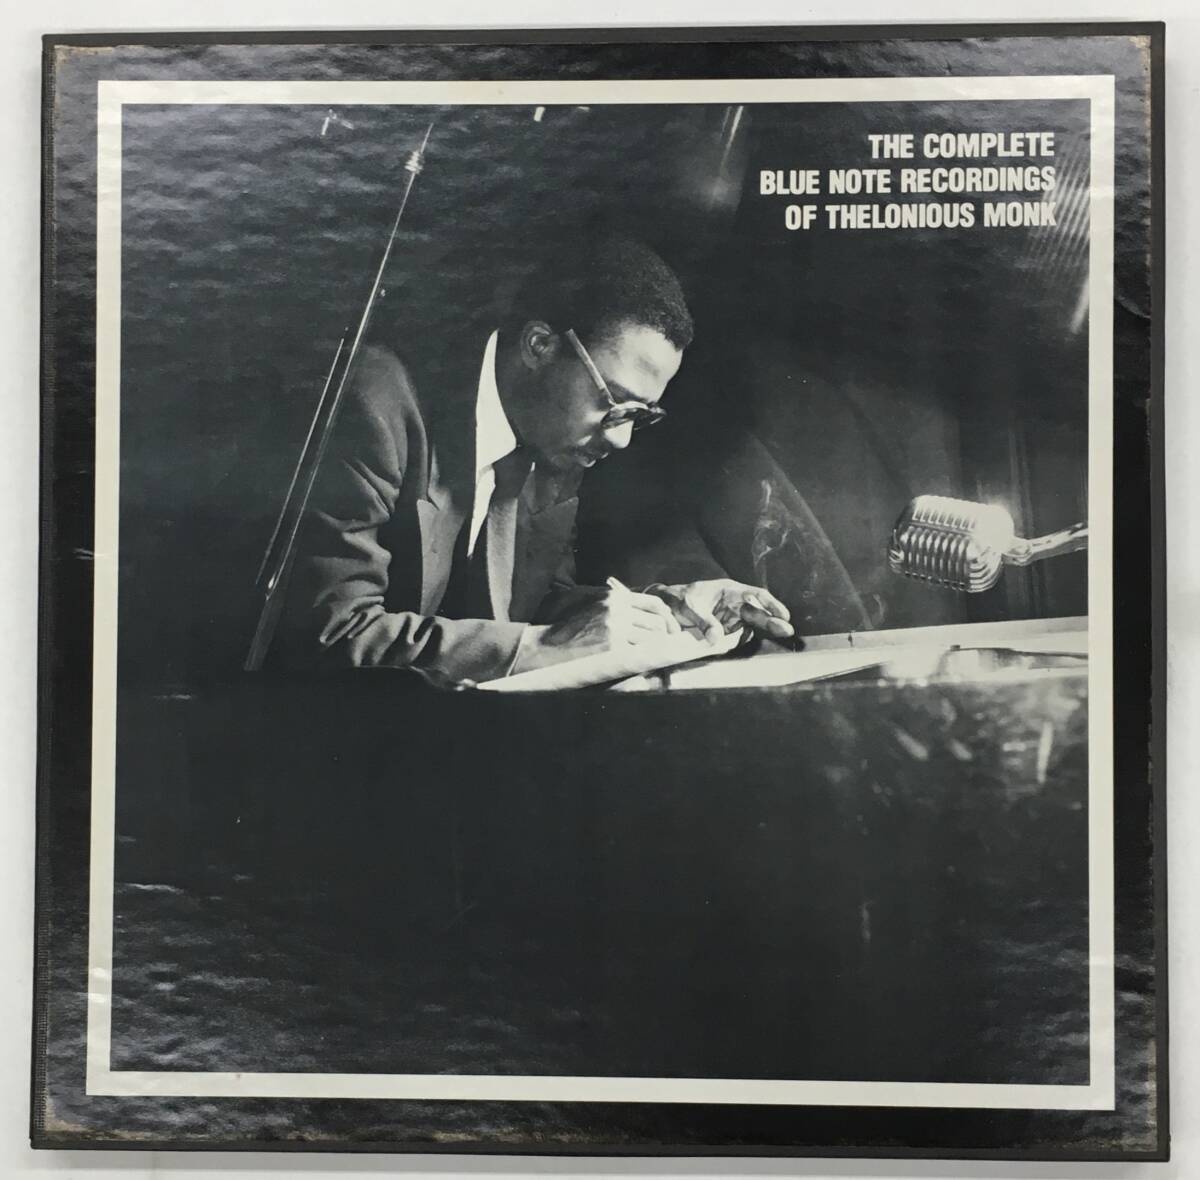 4LP BOX The Complete Blue Note Recordings Of Thelonious Monk MR4-101 Mosaic Limited Numbered セロニアス・モンク_画像2